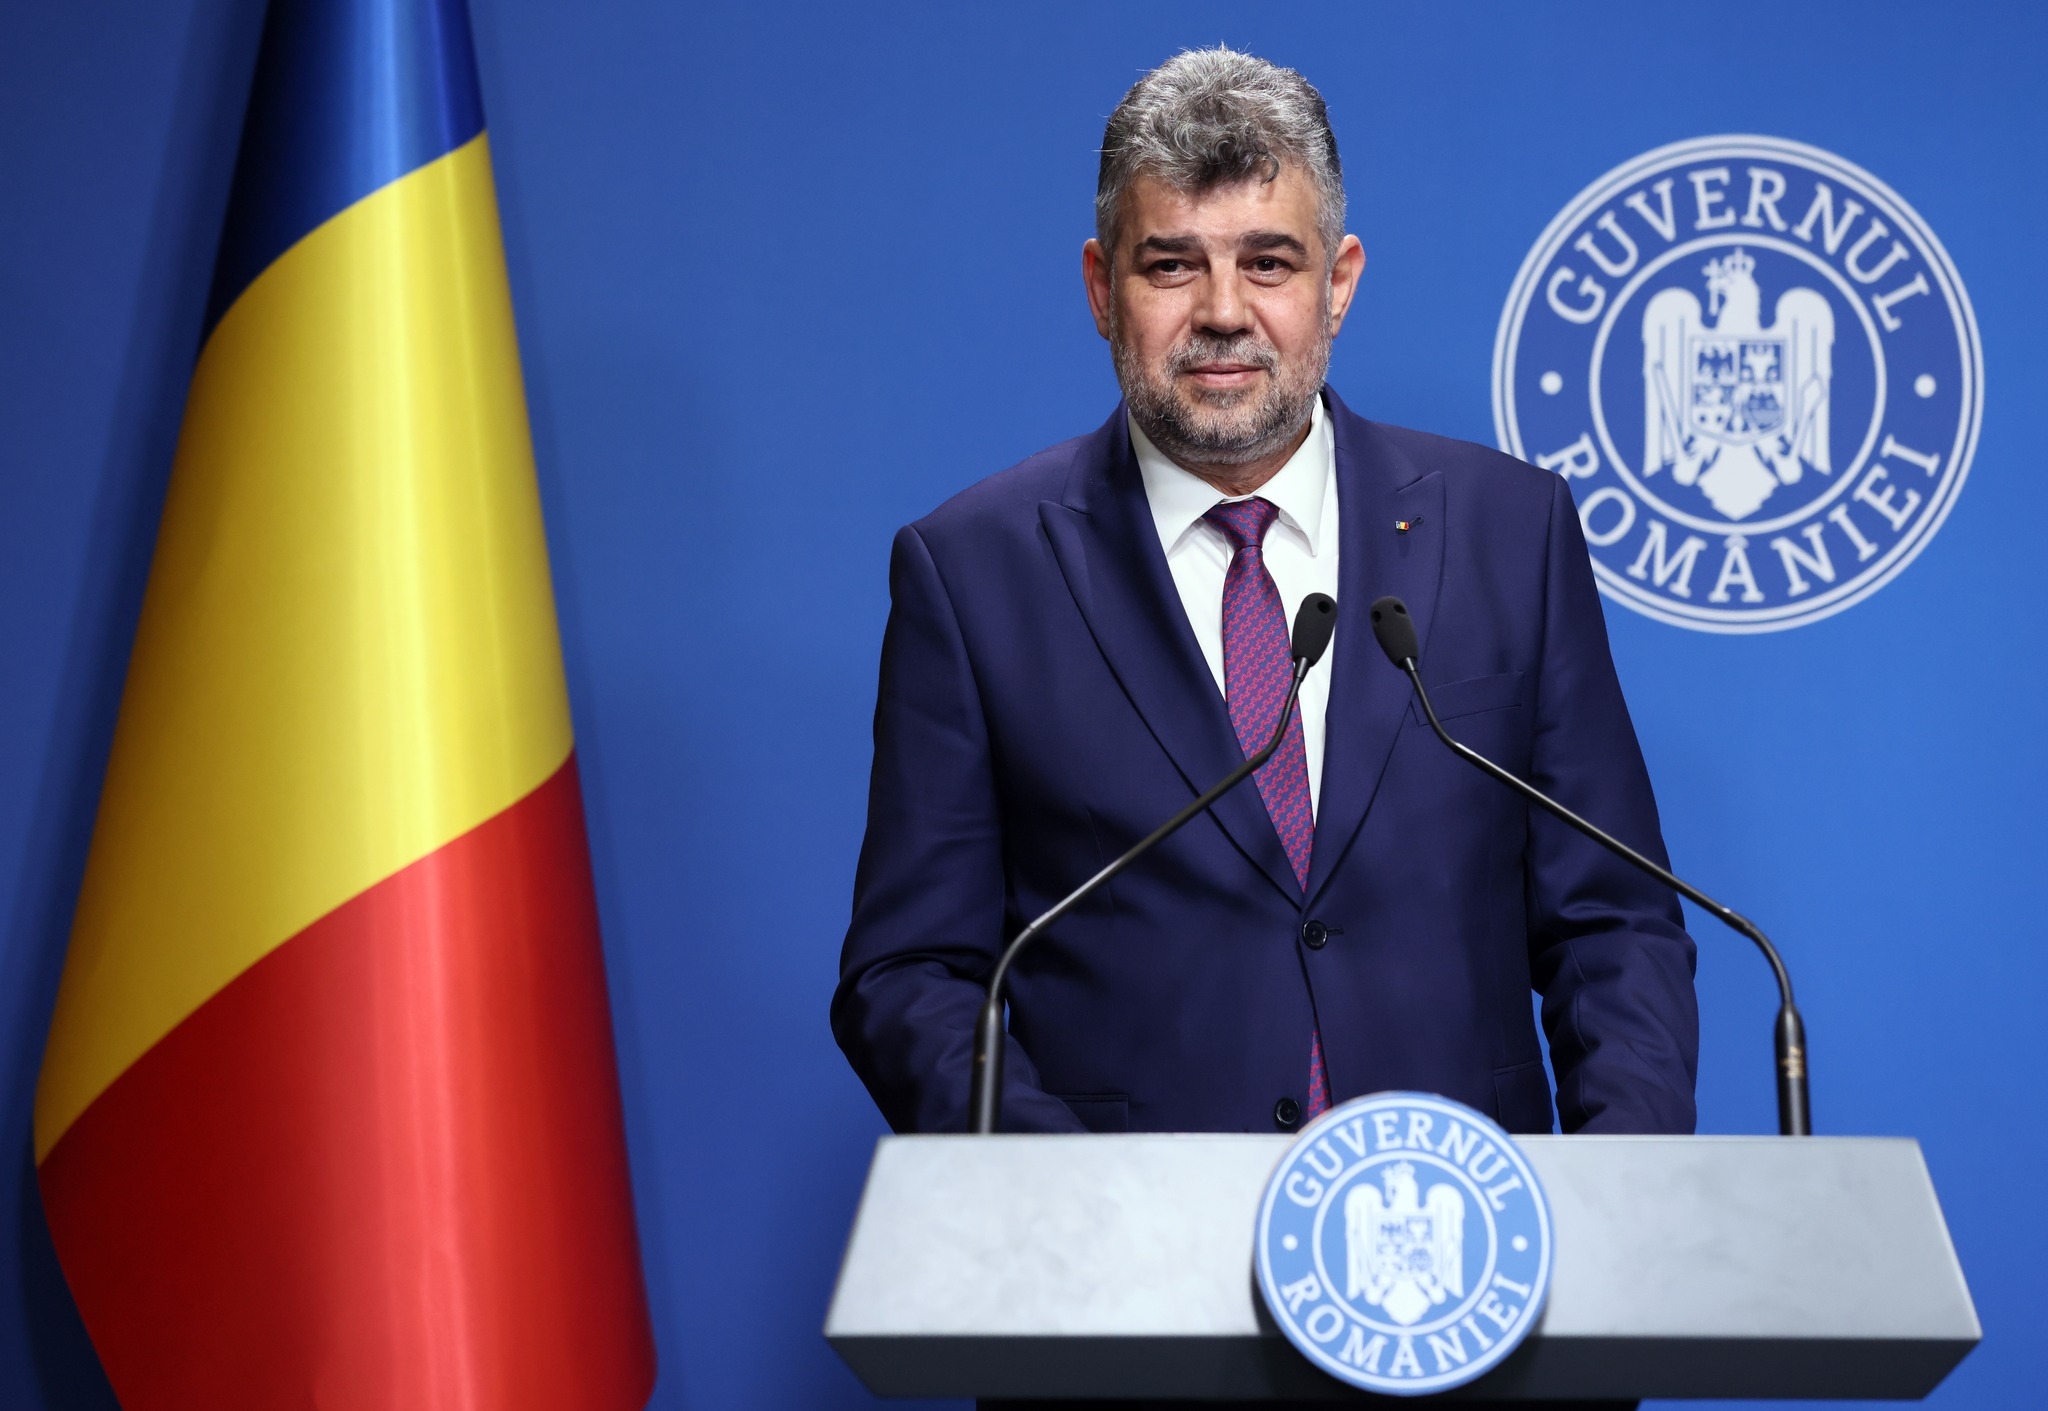 Marcel Ciolacu: Romania intends to play a key role in the recovery of Ukraine